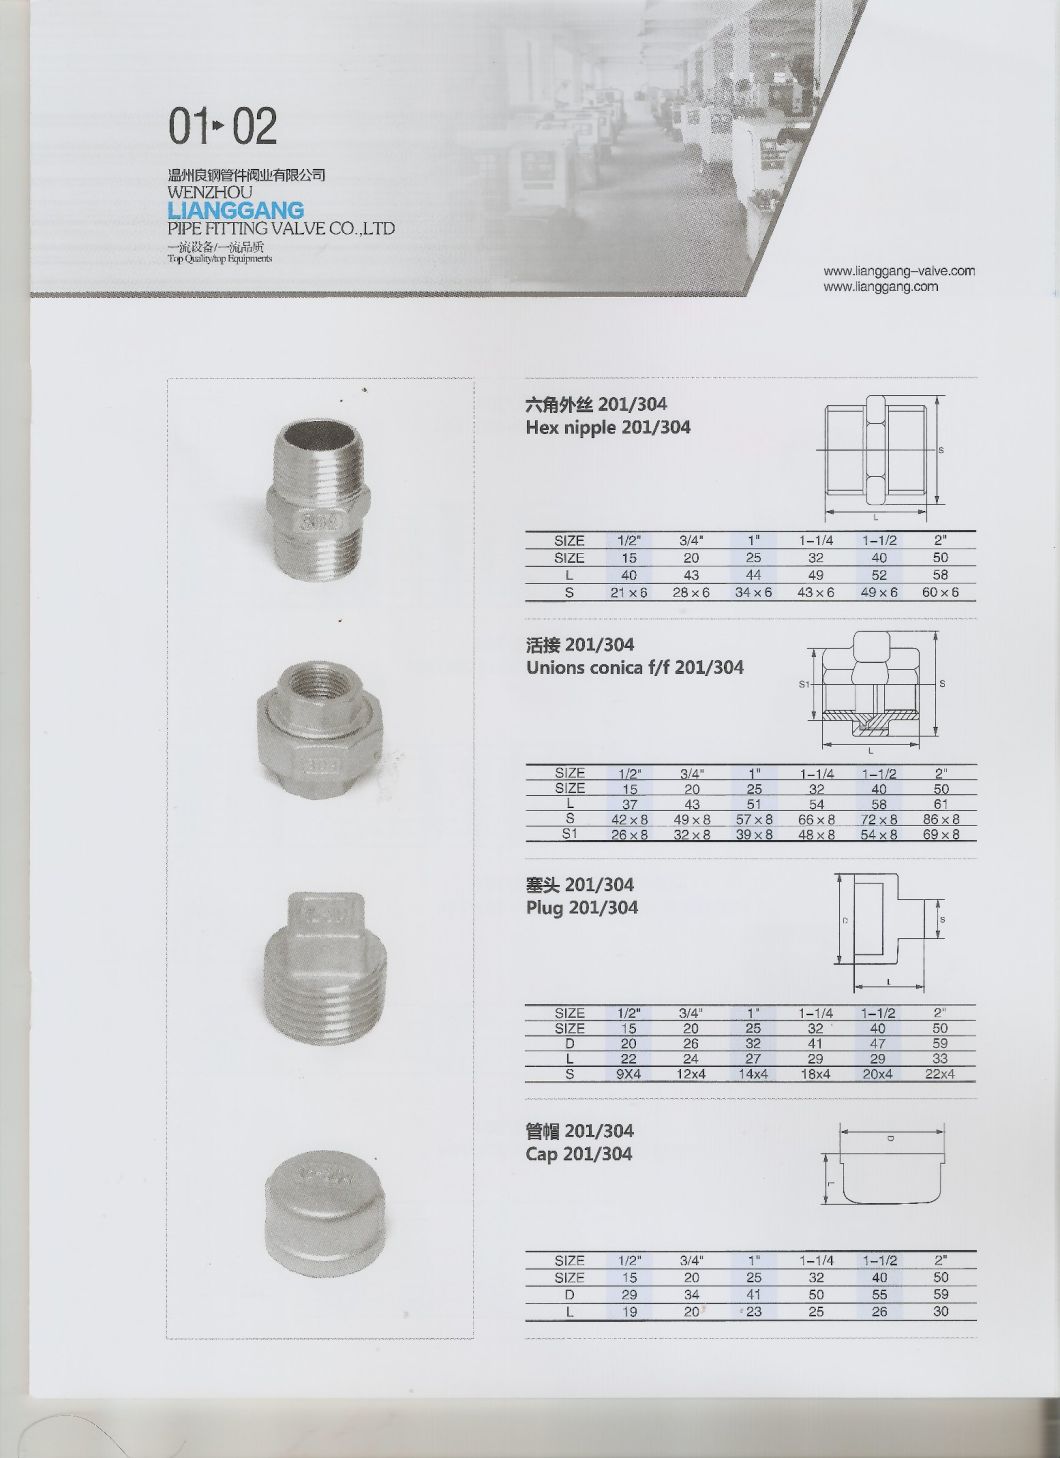 Stainless Steel Pipe Fitting SS304 BSPT NPT Thread Screw Union 1/4inch